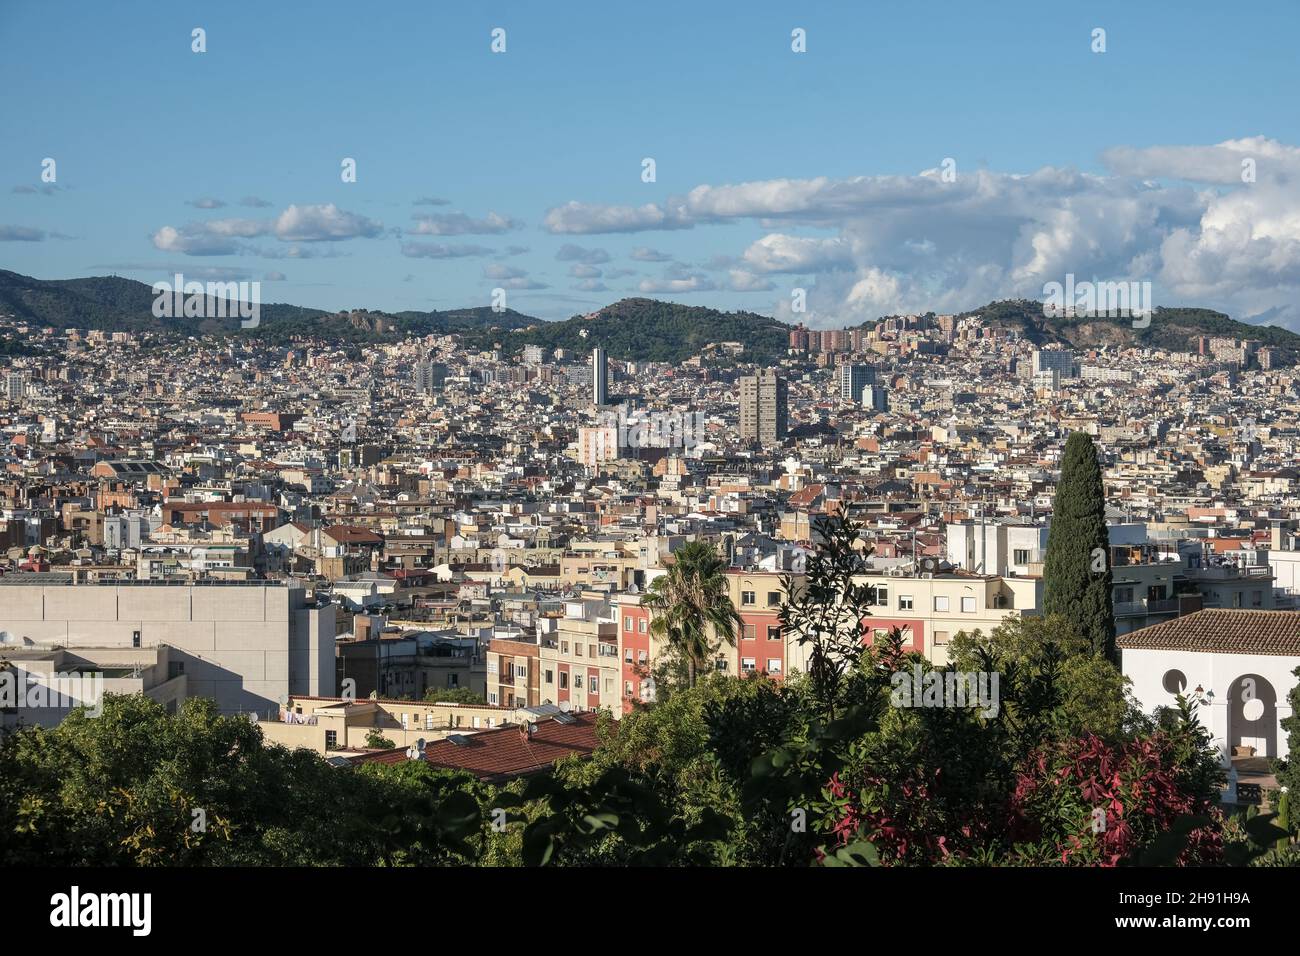 Panoramic view of the southern city of Europe during the day. Stock Photo